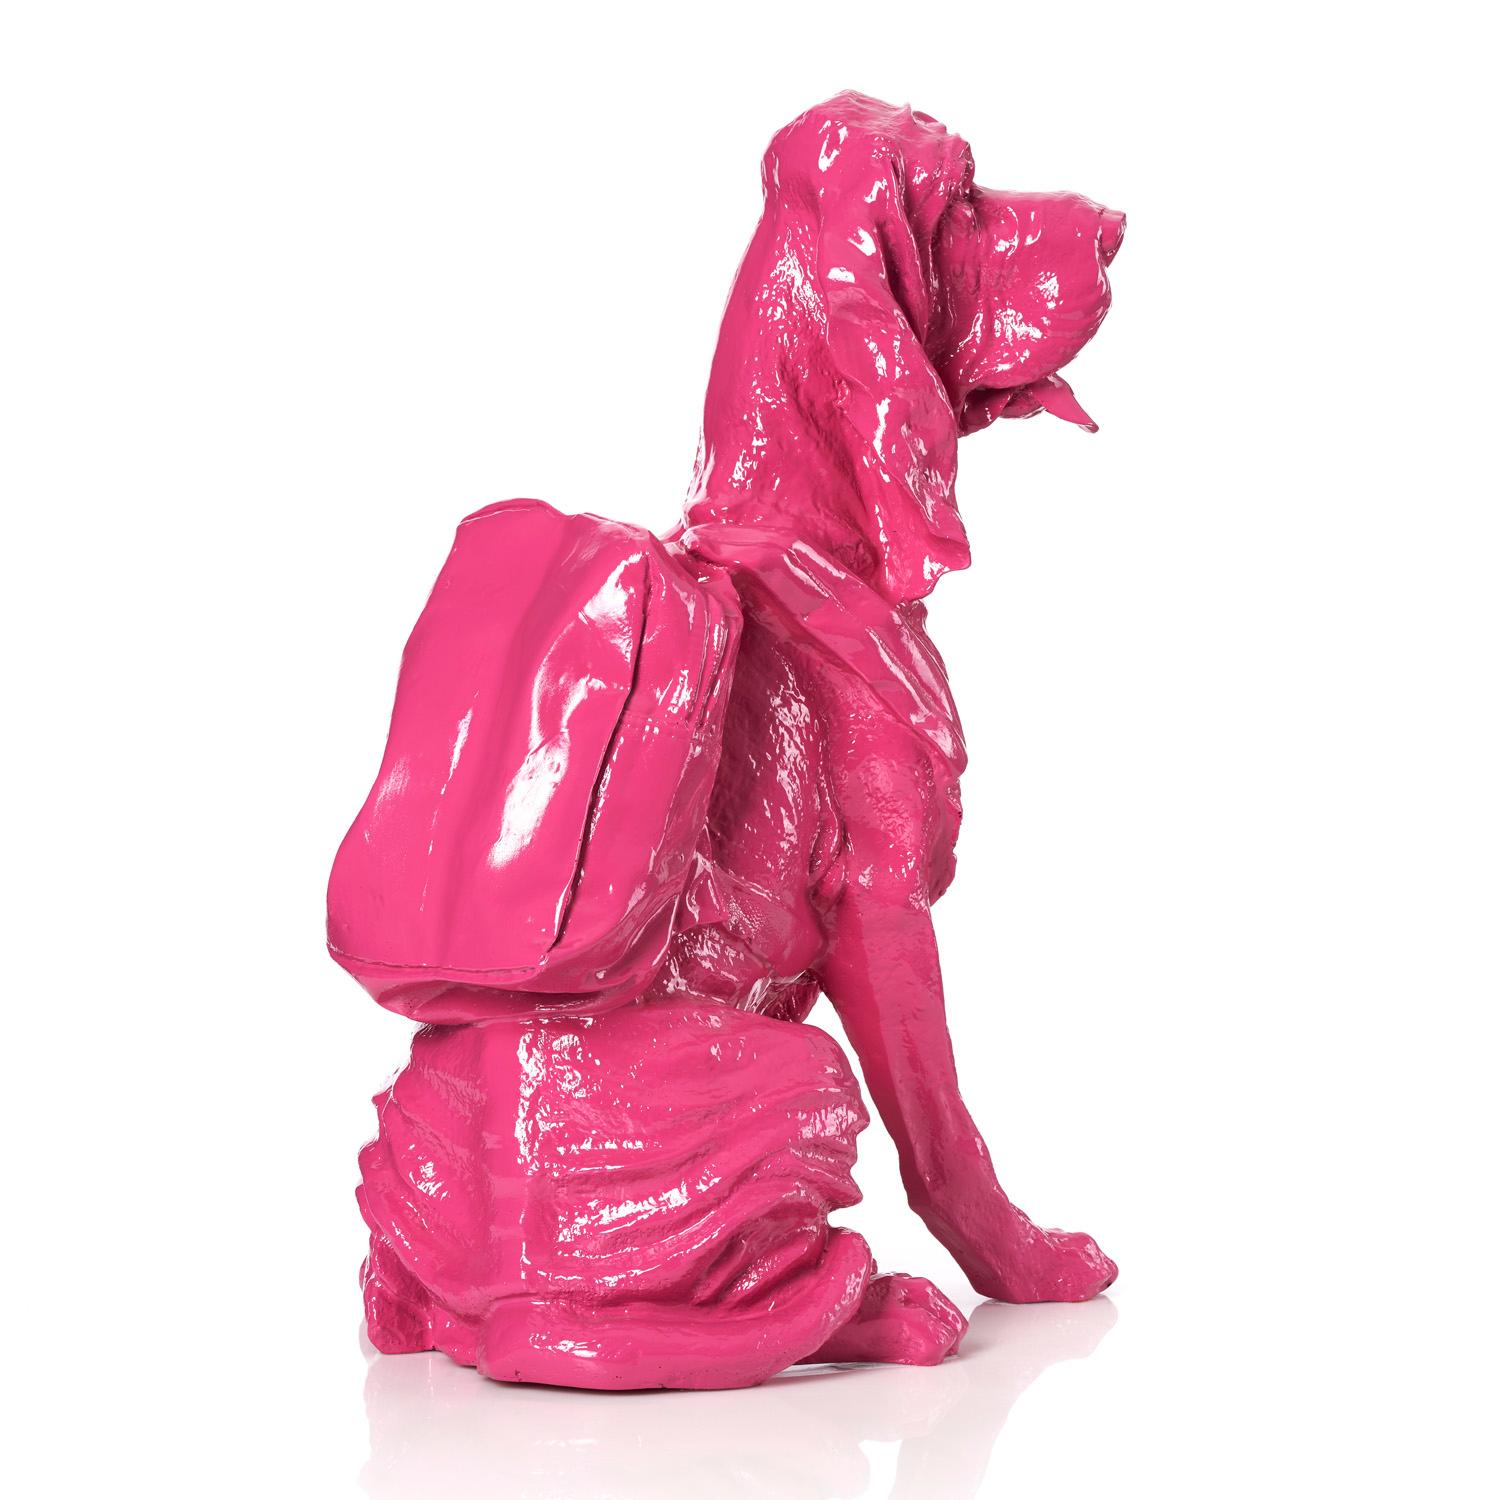 Cloned Bloodhound with Backpack (pink) - Pop Art Sculpture by William Sweetlove